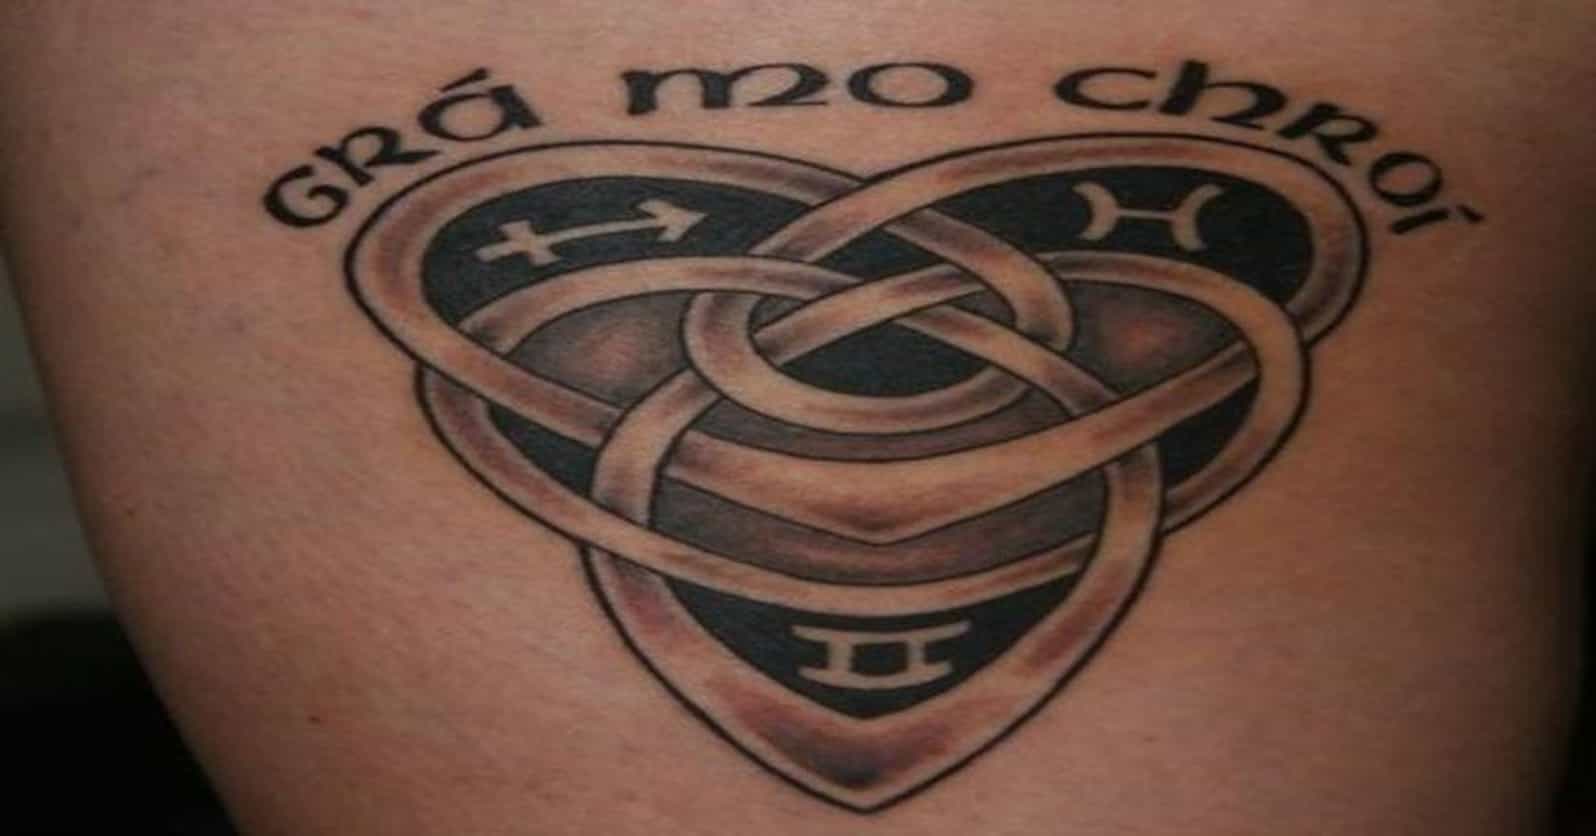 Common Irish Tattoos: What Do They Mean?